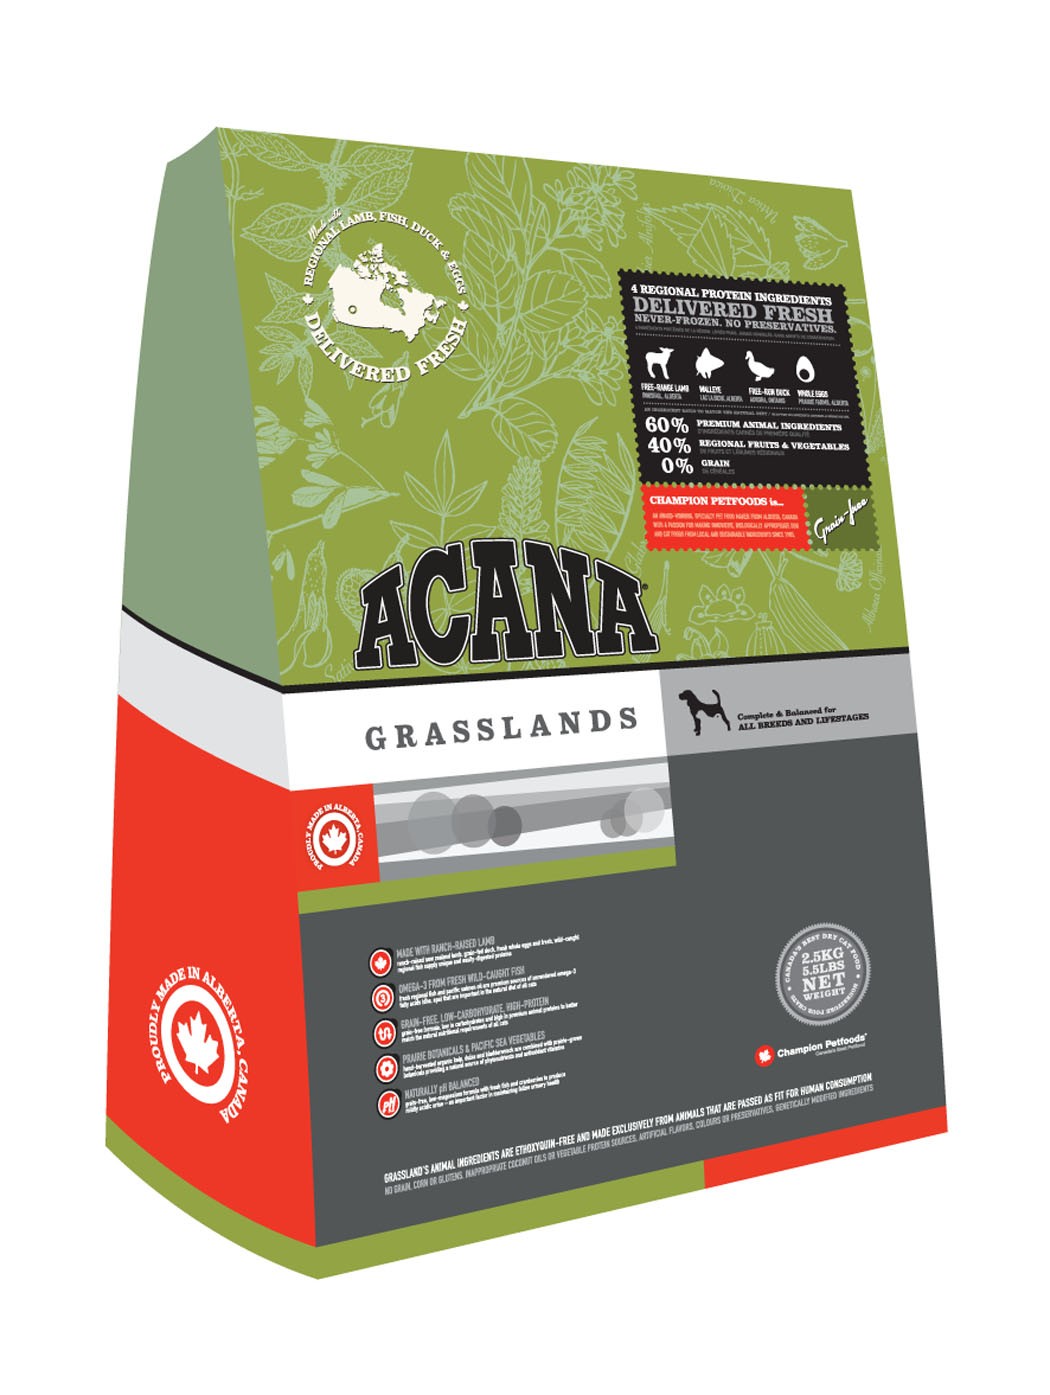 Best food for your furry friend. Willie and Mabel love ACANA Grasslands Regional Formula Grain-Free Dry Dog Food – and I love that it’s a healthy pick for my little loves. 